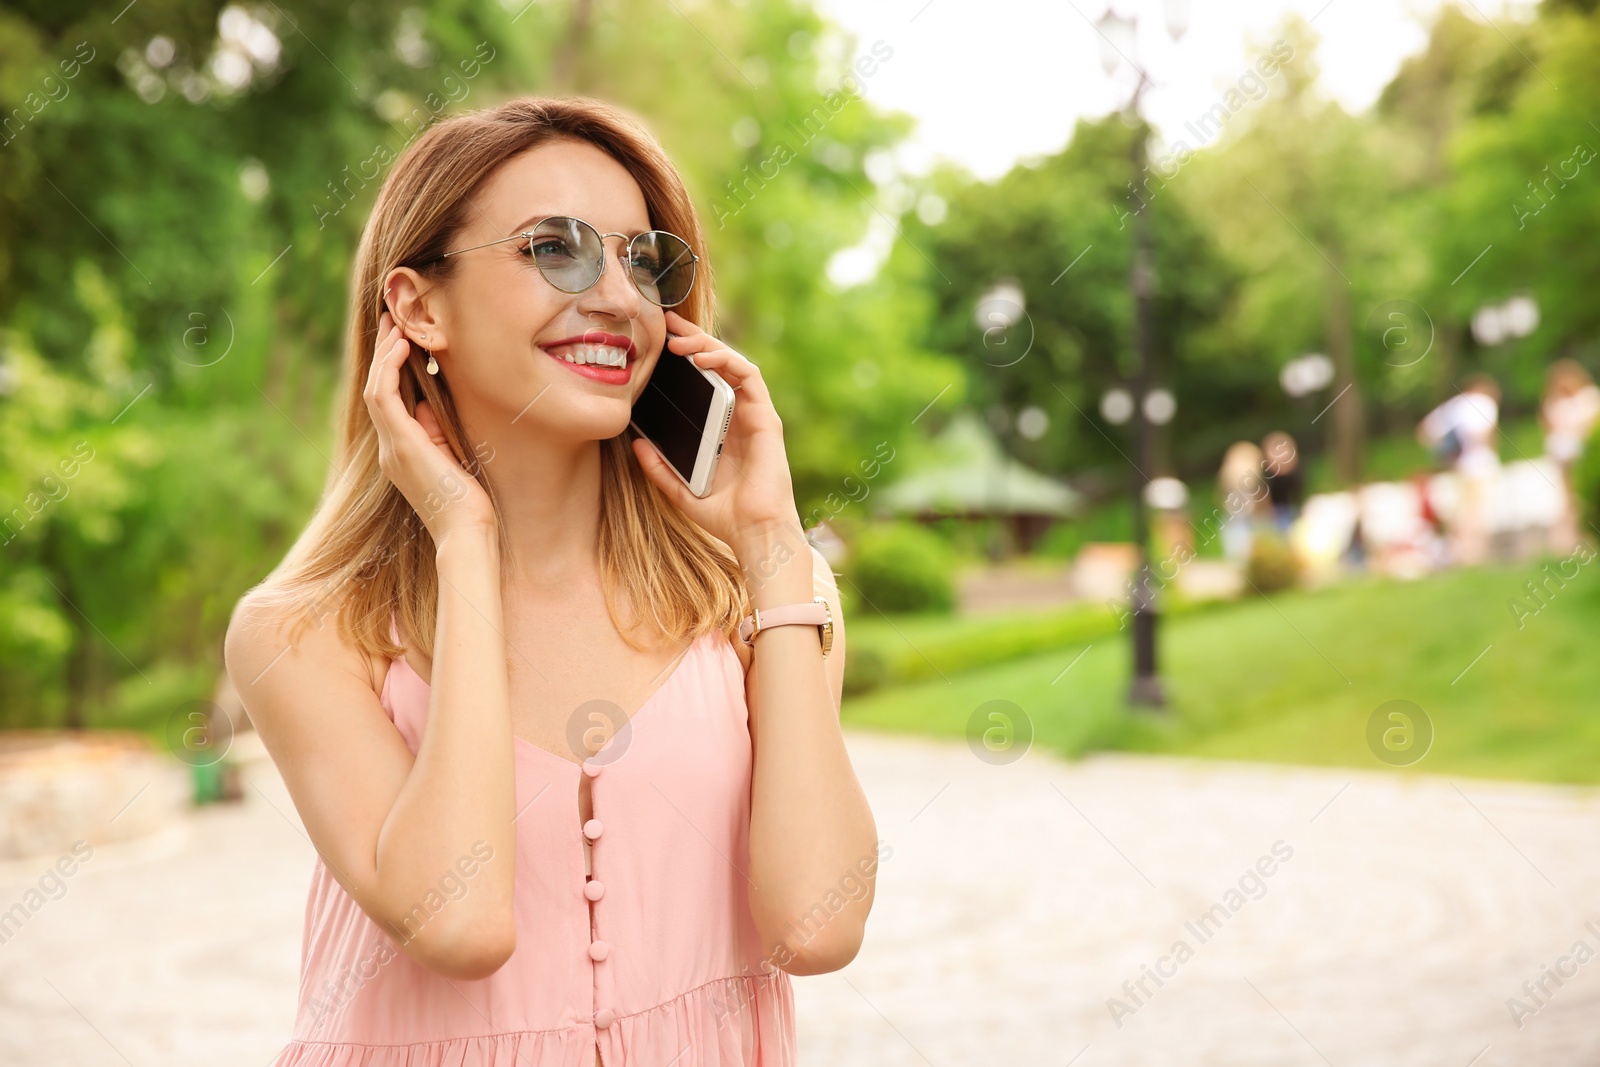 Photo of Young woman in stylish outfit talking on phone outdoors